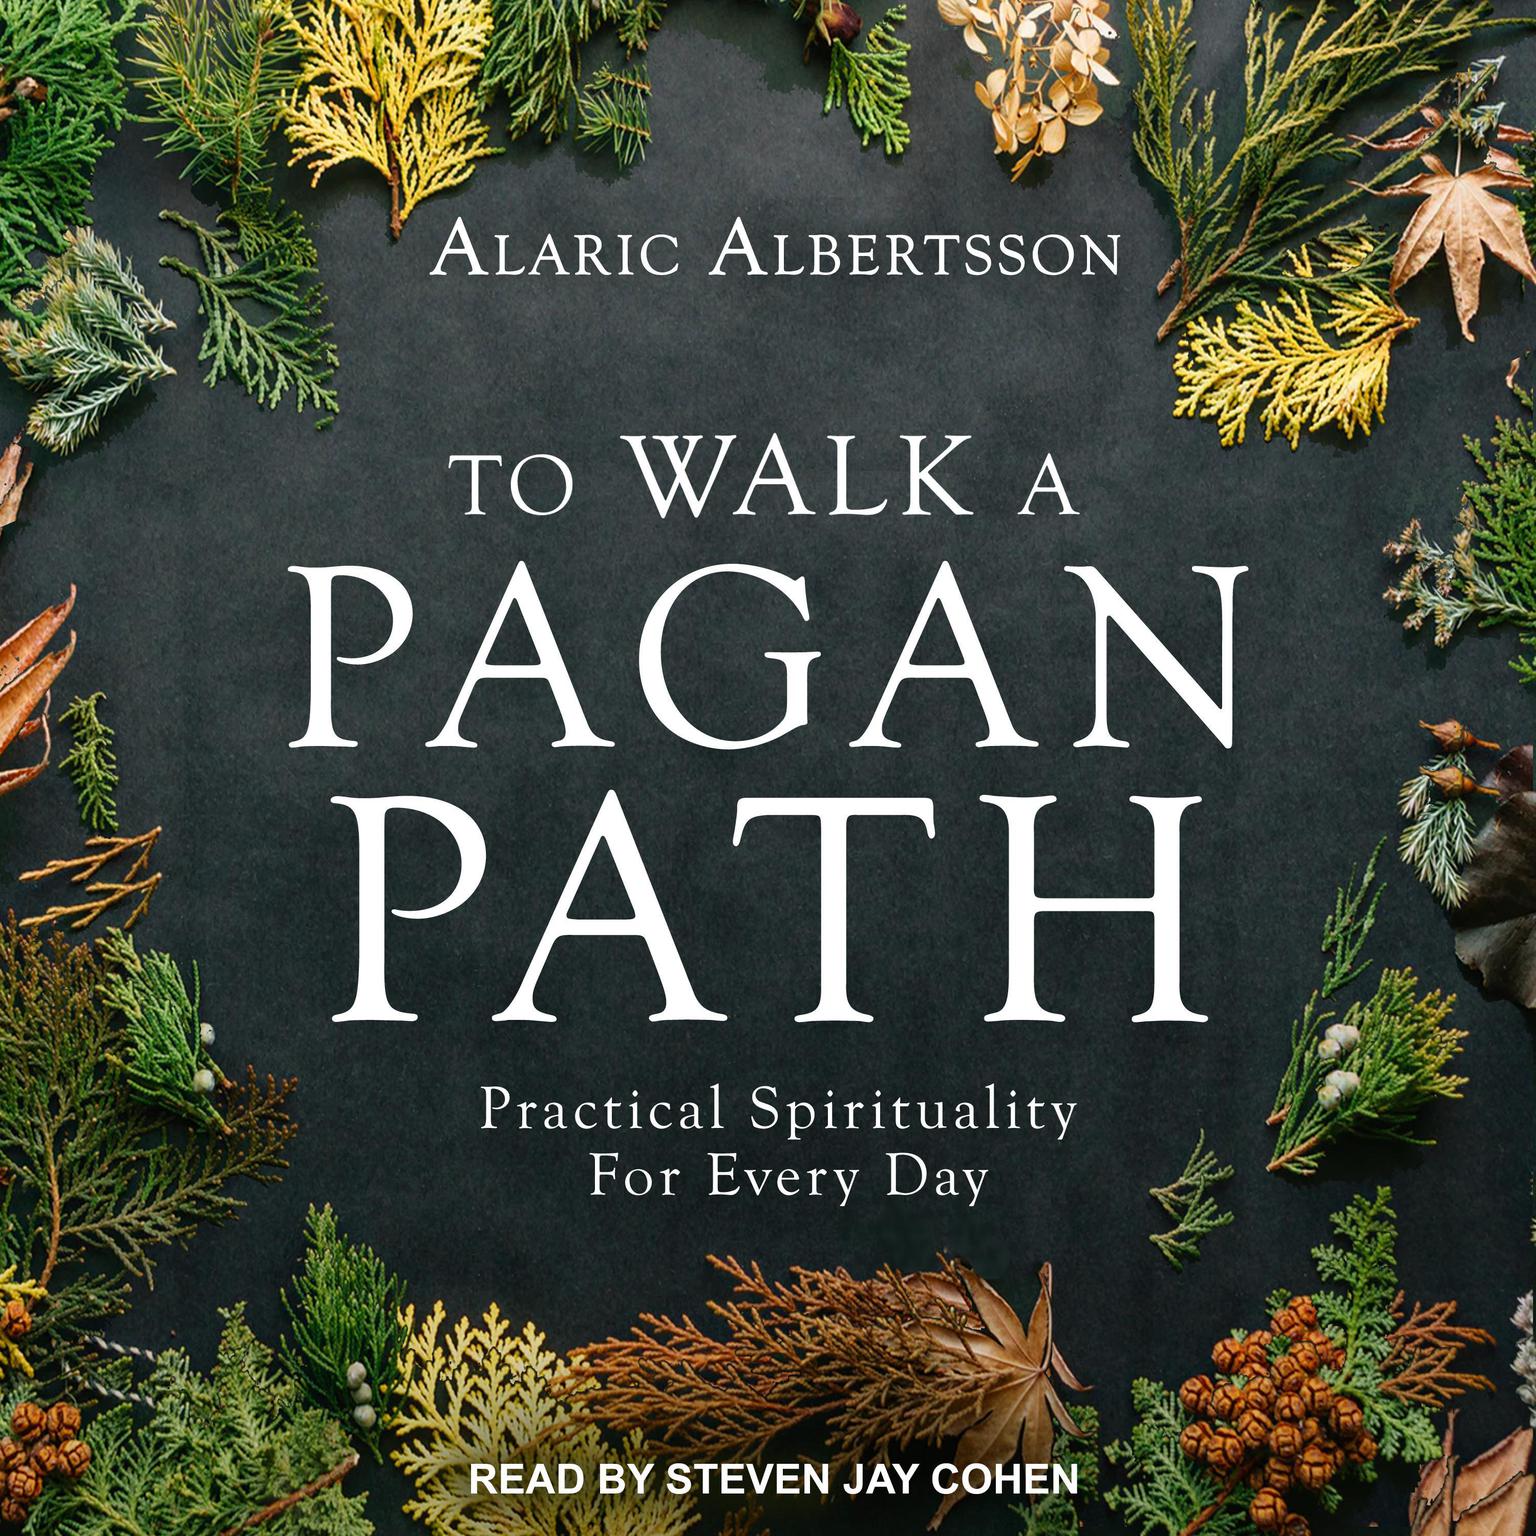 To Walk a Pagan Path: Practical Spirituality for Every Day Audiobook, by Alaric Albertsson